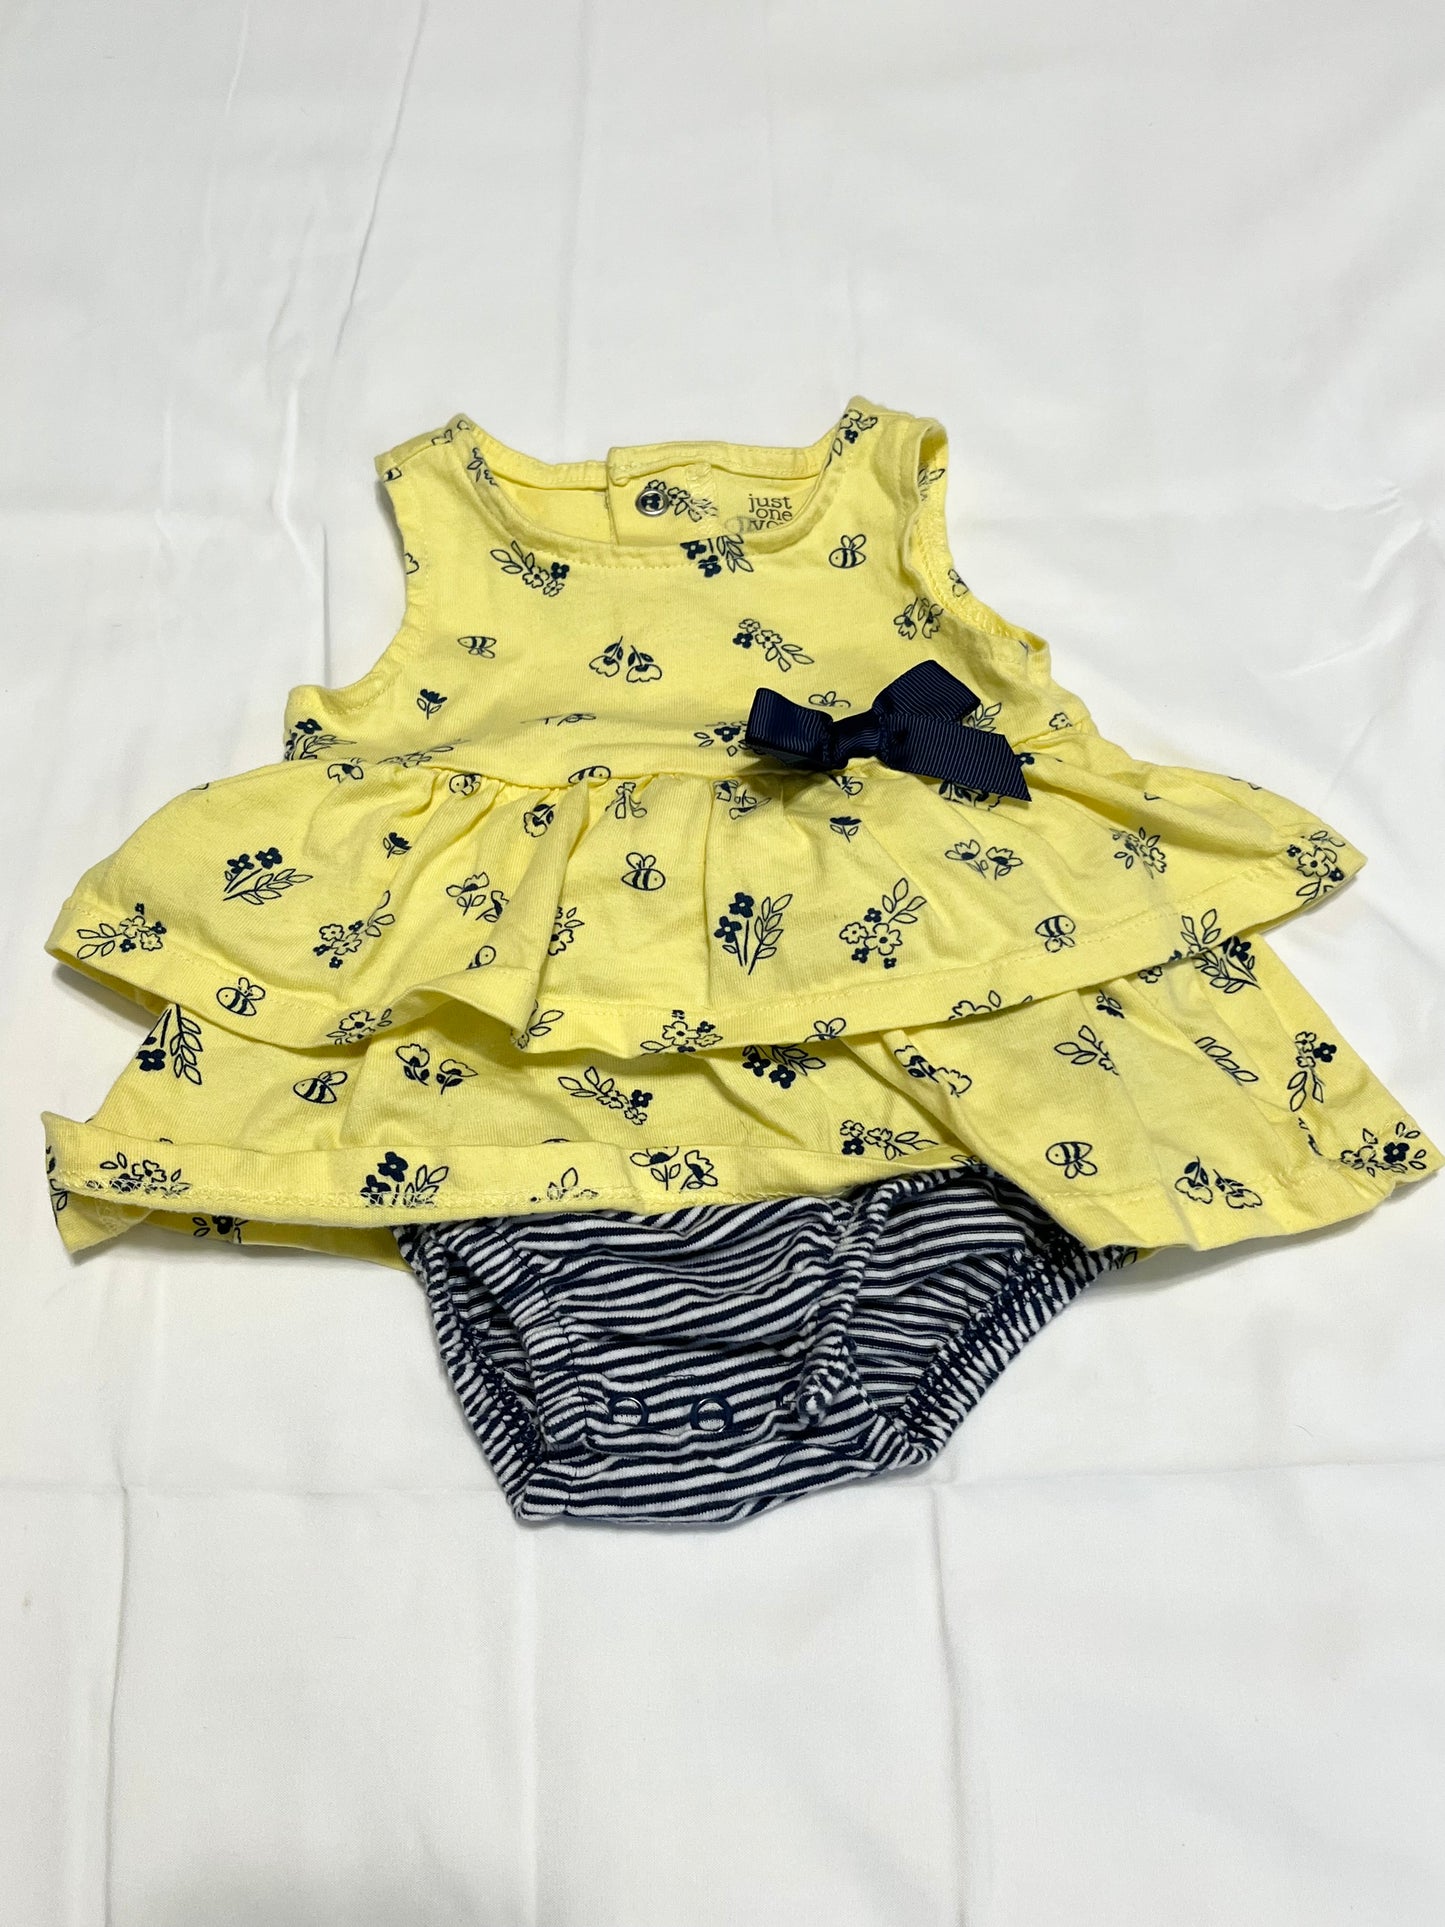 Girls 3MO Carter's Summer Outfits (3 Sets)